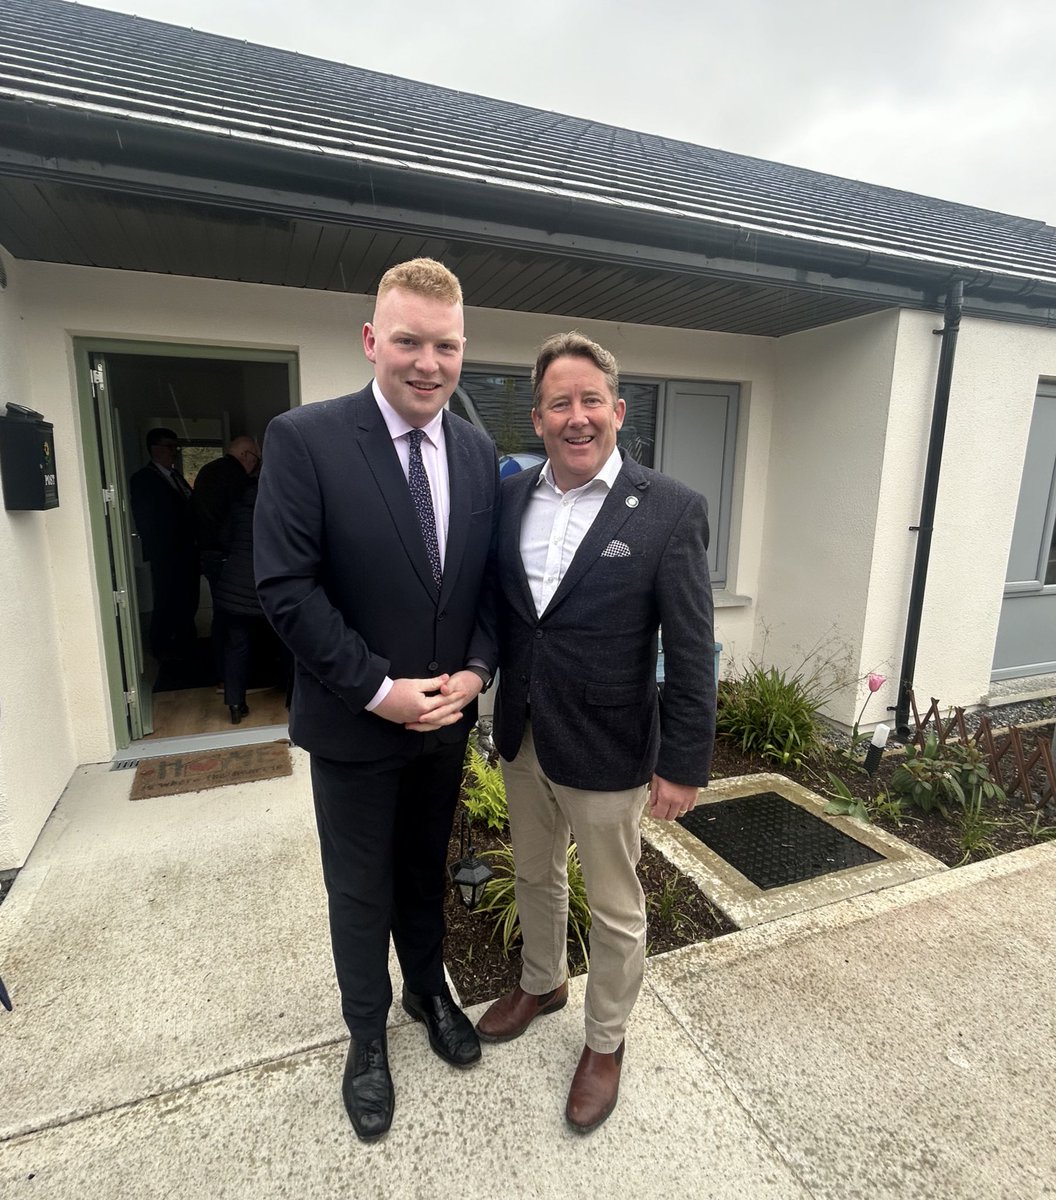 I’ve spent the day with my @fiannafailparty colleagues in #Laois today with @SeanFlemingTD Cllr Padraig Fleming & Cllr Paschal McEvoy and I was delighted to meet with our new candidate in Portarlington Joey Kennedy - our youngest candidates.